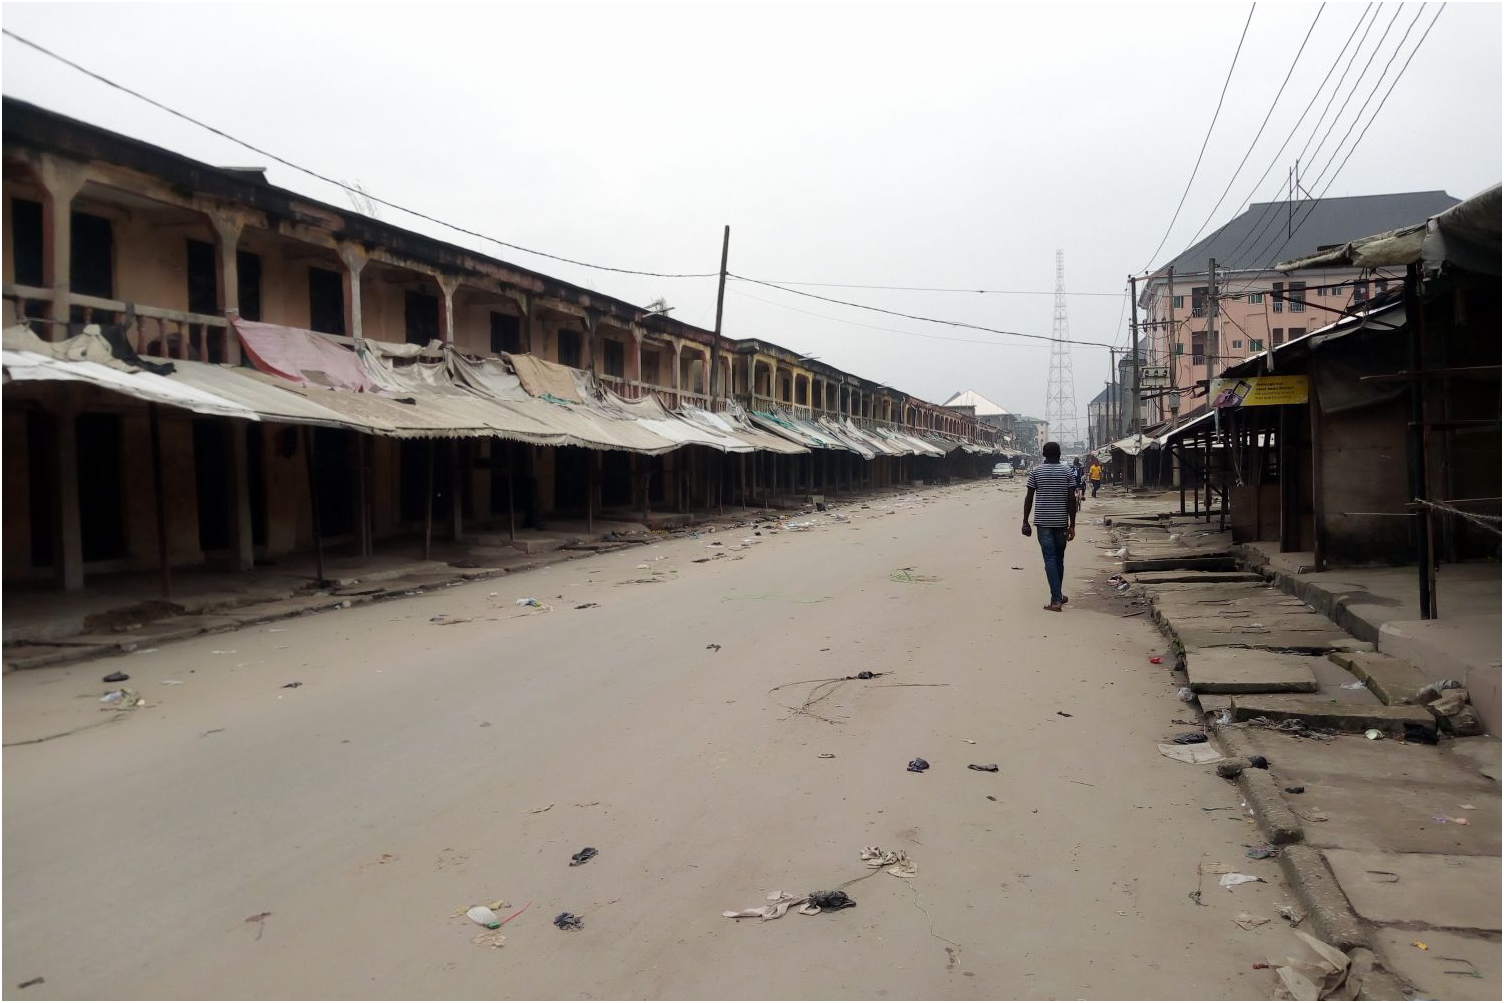 One of the busiest streets in Aba totally deserted